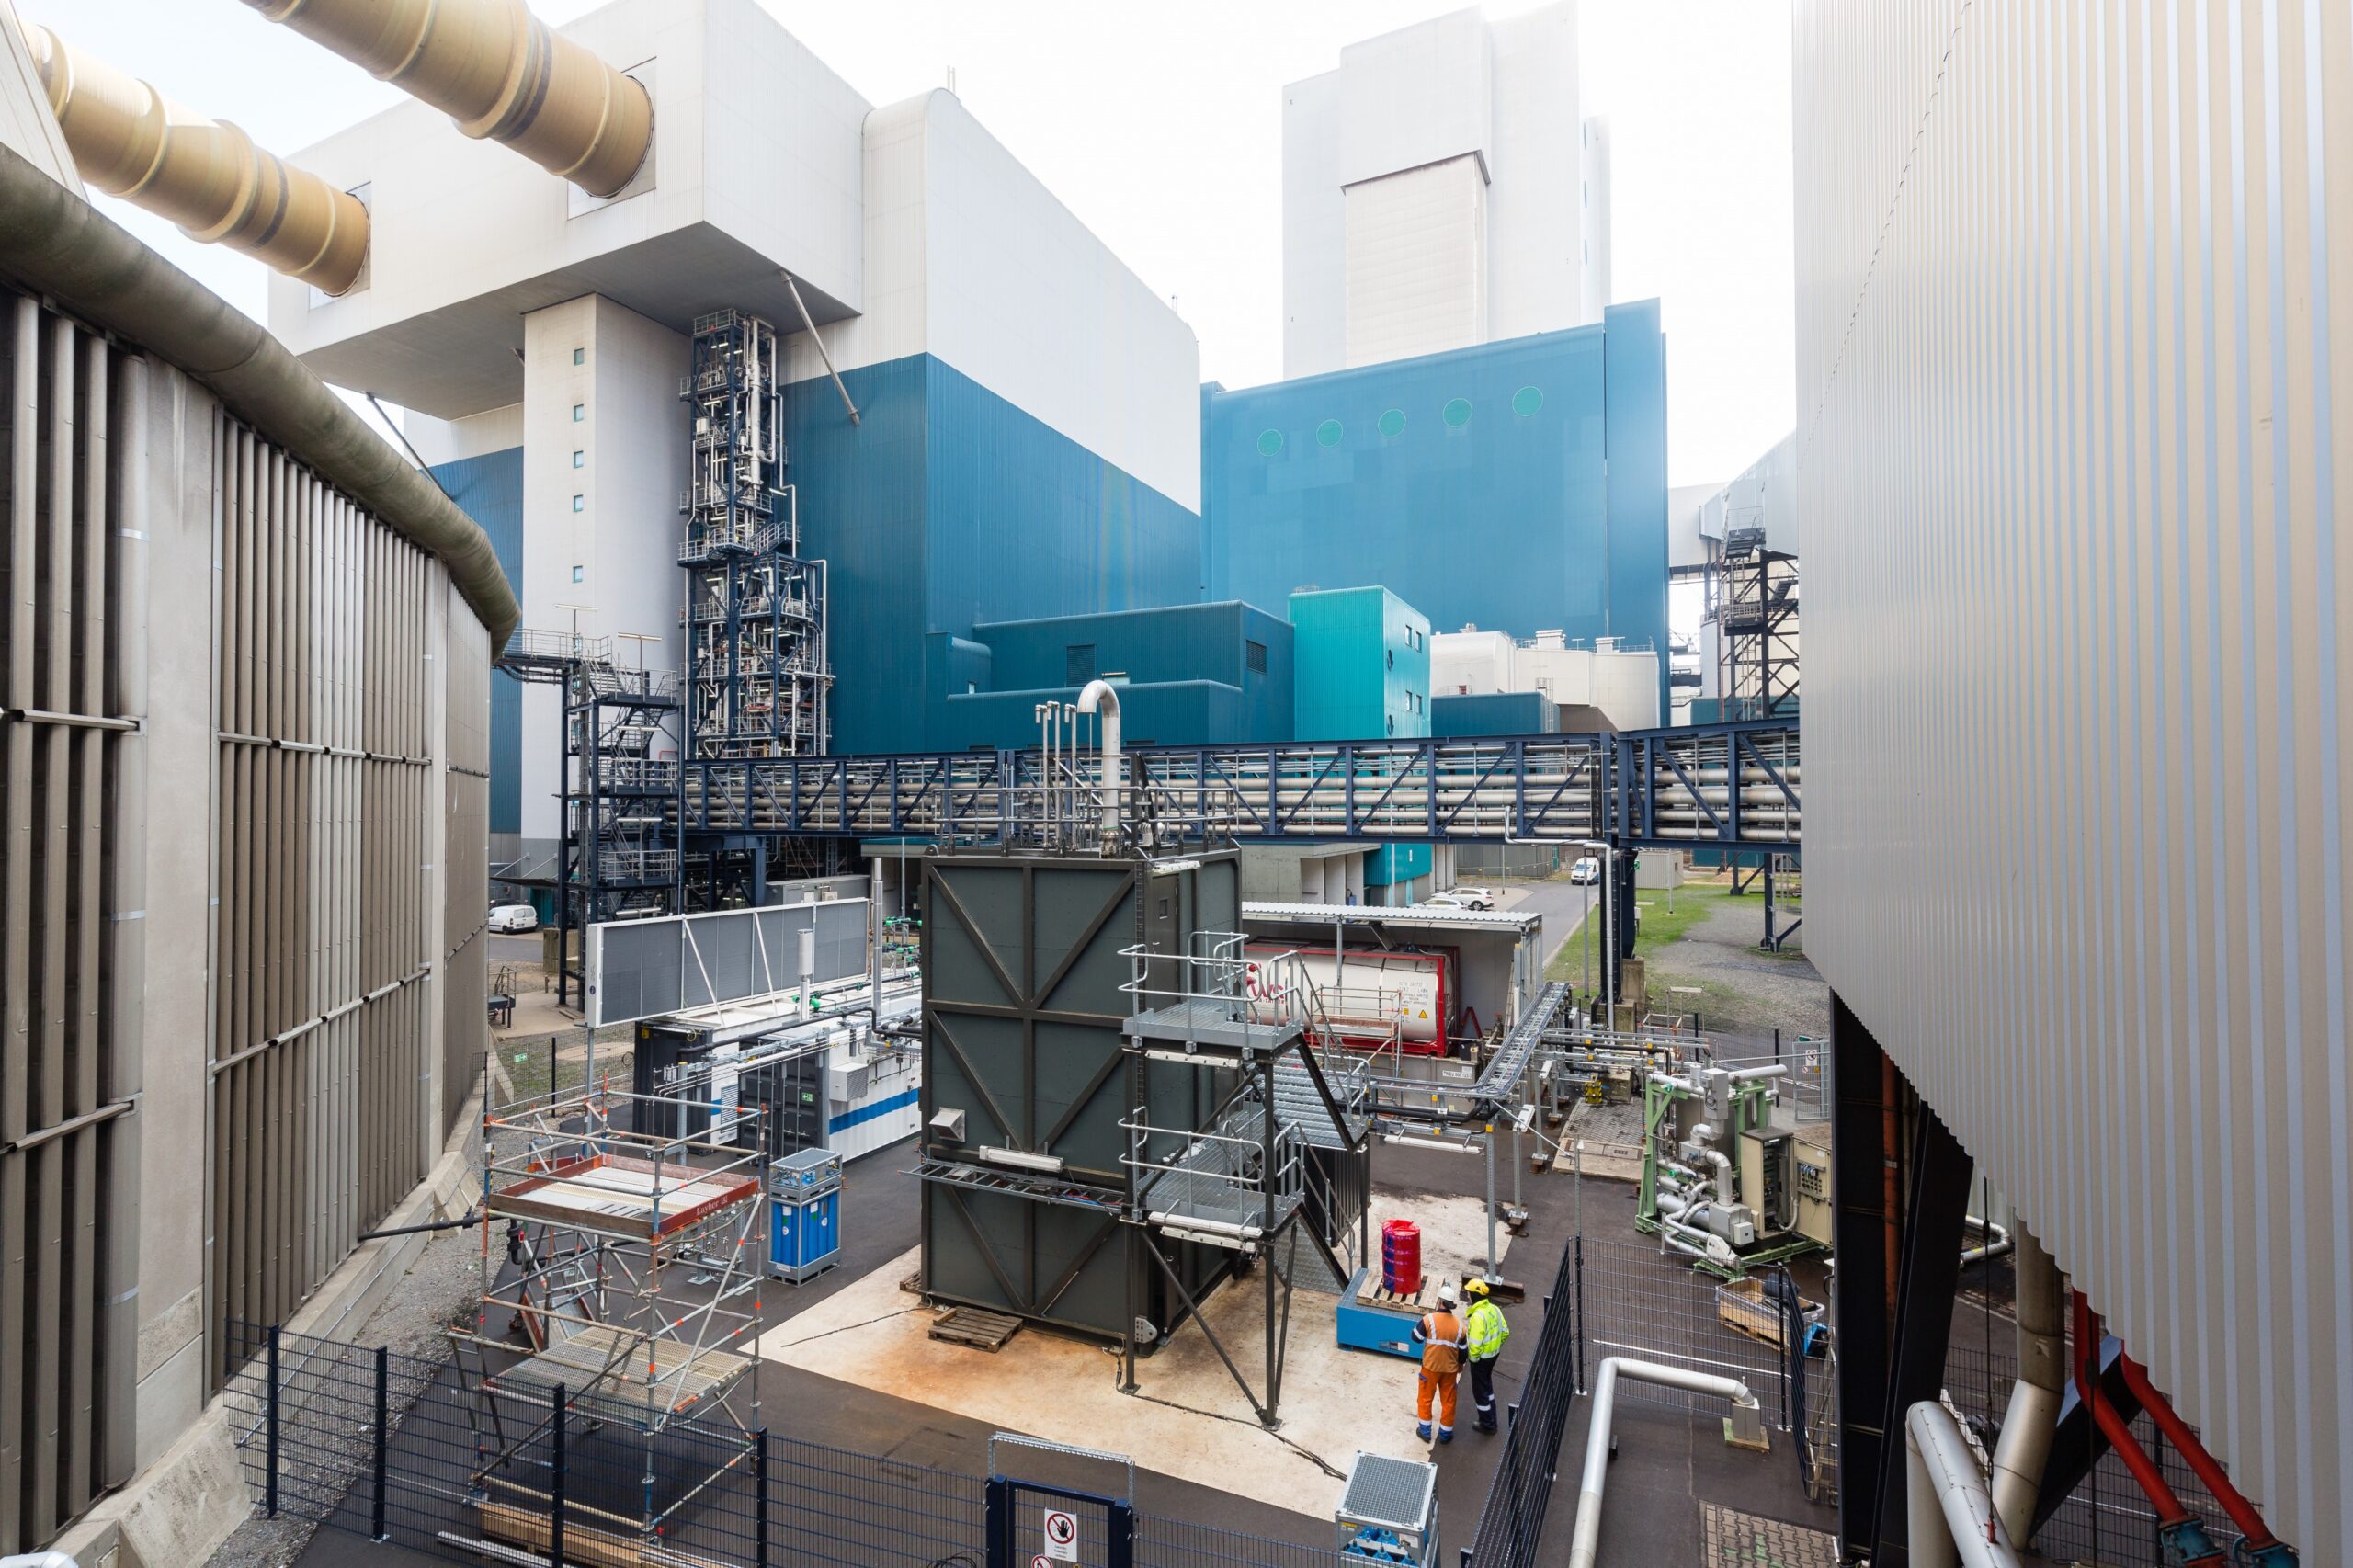 RWE’s amine-based post-combustion carbon capture pilot plant at Niederaussem supplies CO2 to the CCU Campus, where R&D demonstrators to convert CO2 into fuels and chemicals are tested, including the ECO2Fuel demonstrator expected in 2025